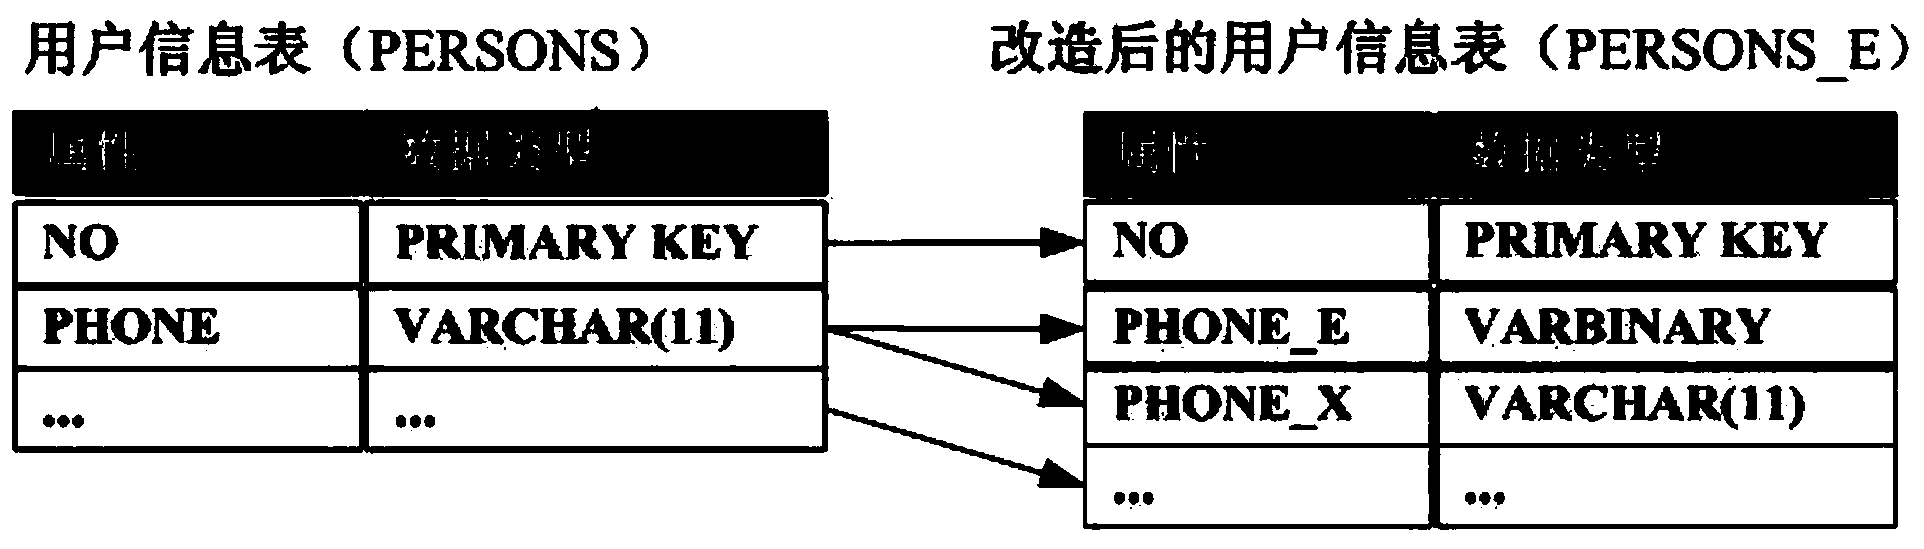 Server-side personal privacy data protecting method in network information system